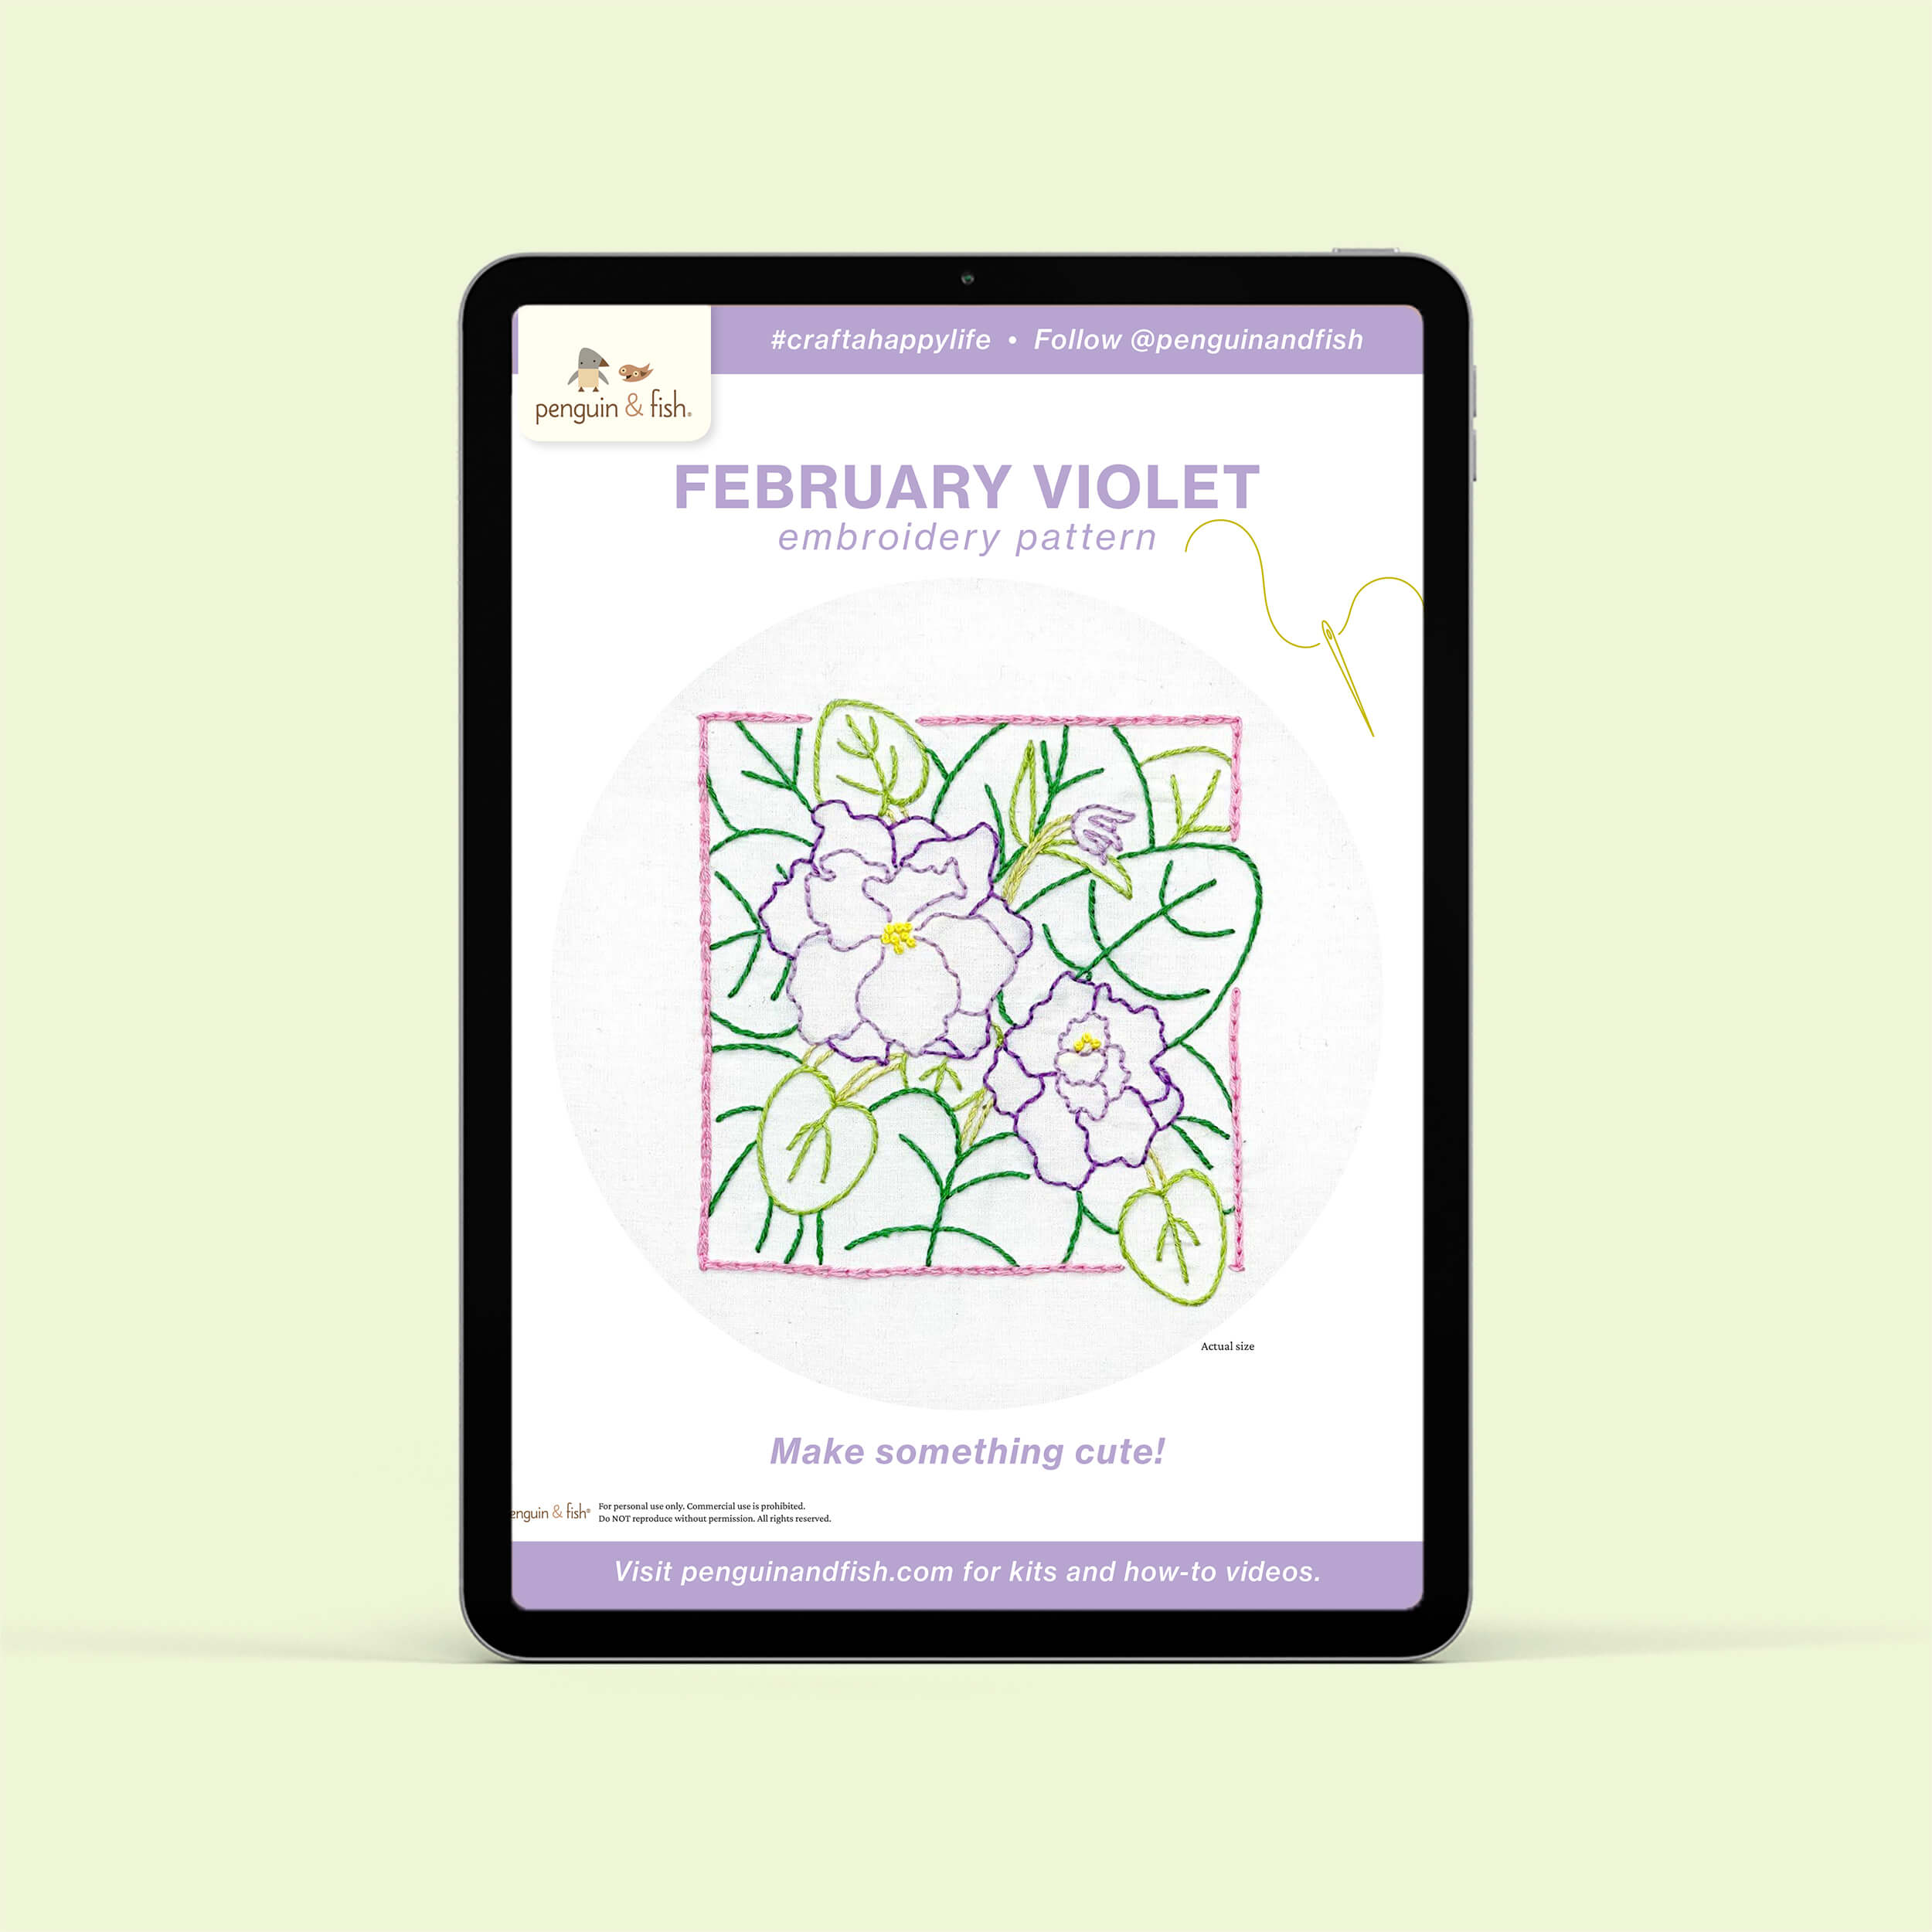 February Violet PDF embroidery pattern shown on a tablet